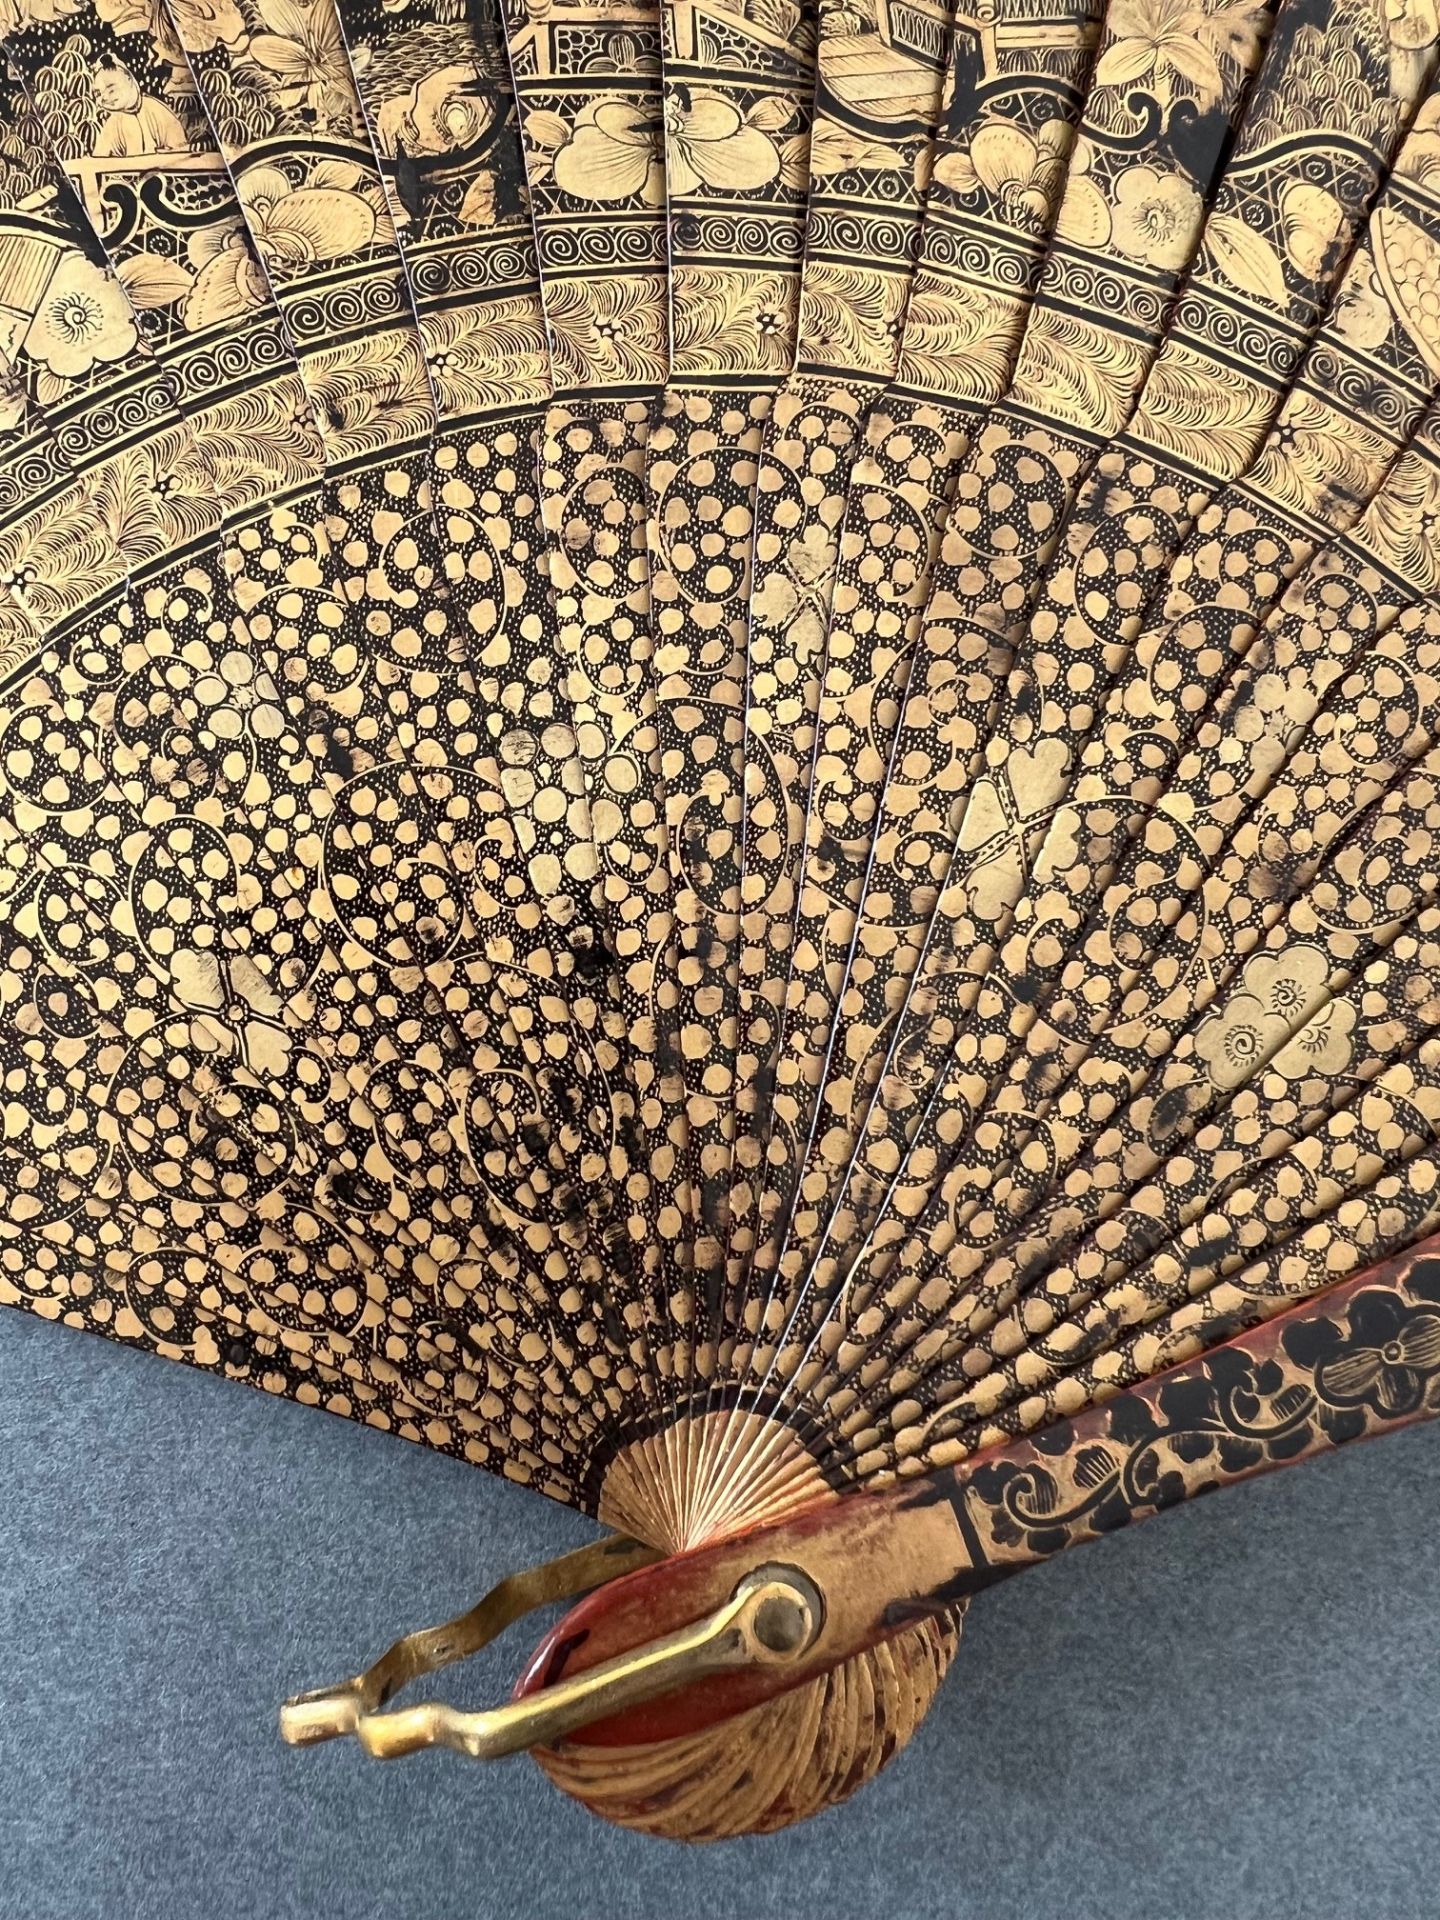 CHINESE EXPORT HIGHLY DECORATIVE FAN WITH LACQUERED DECORATION - Image 6 of 6